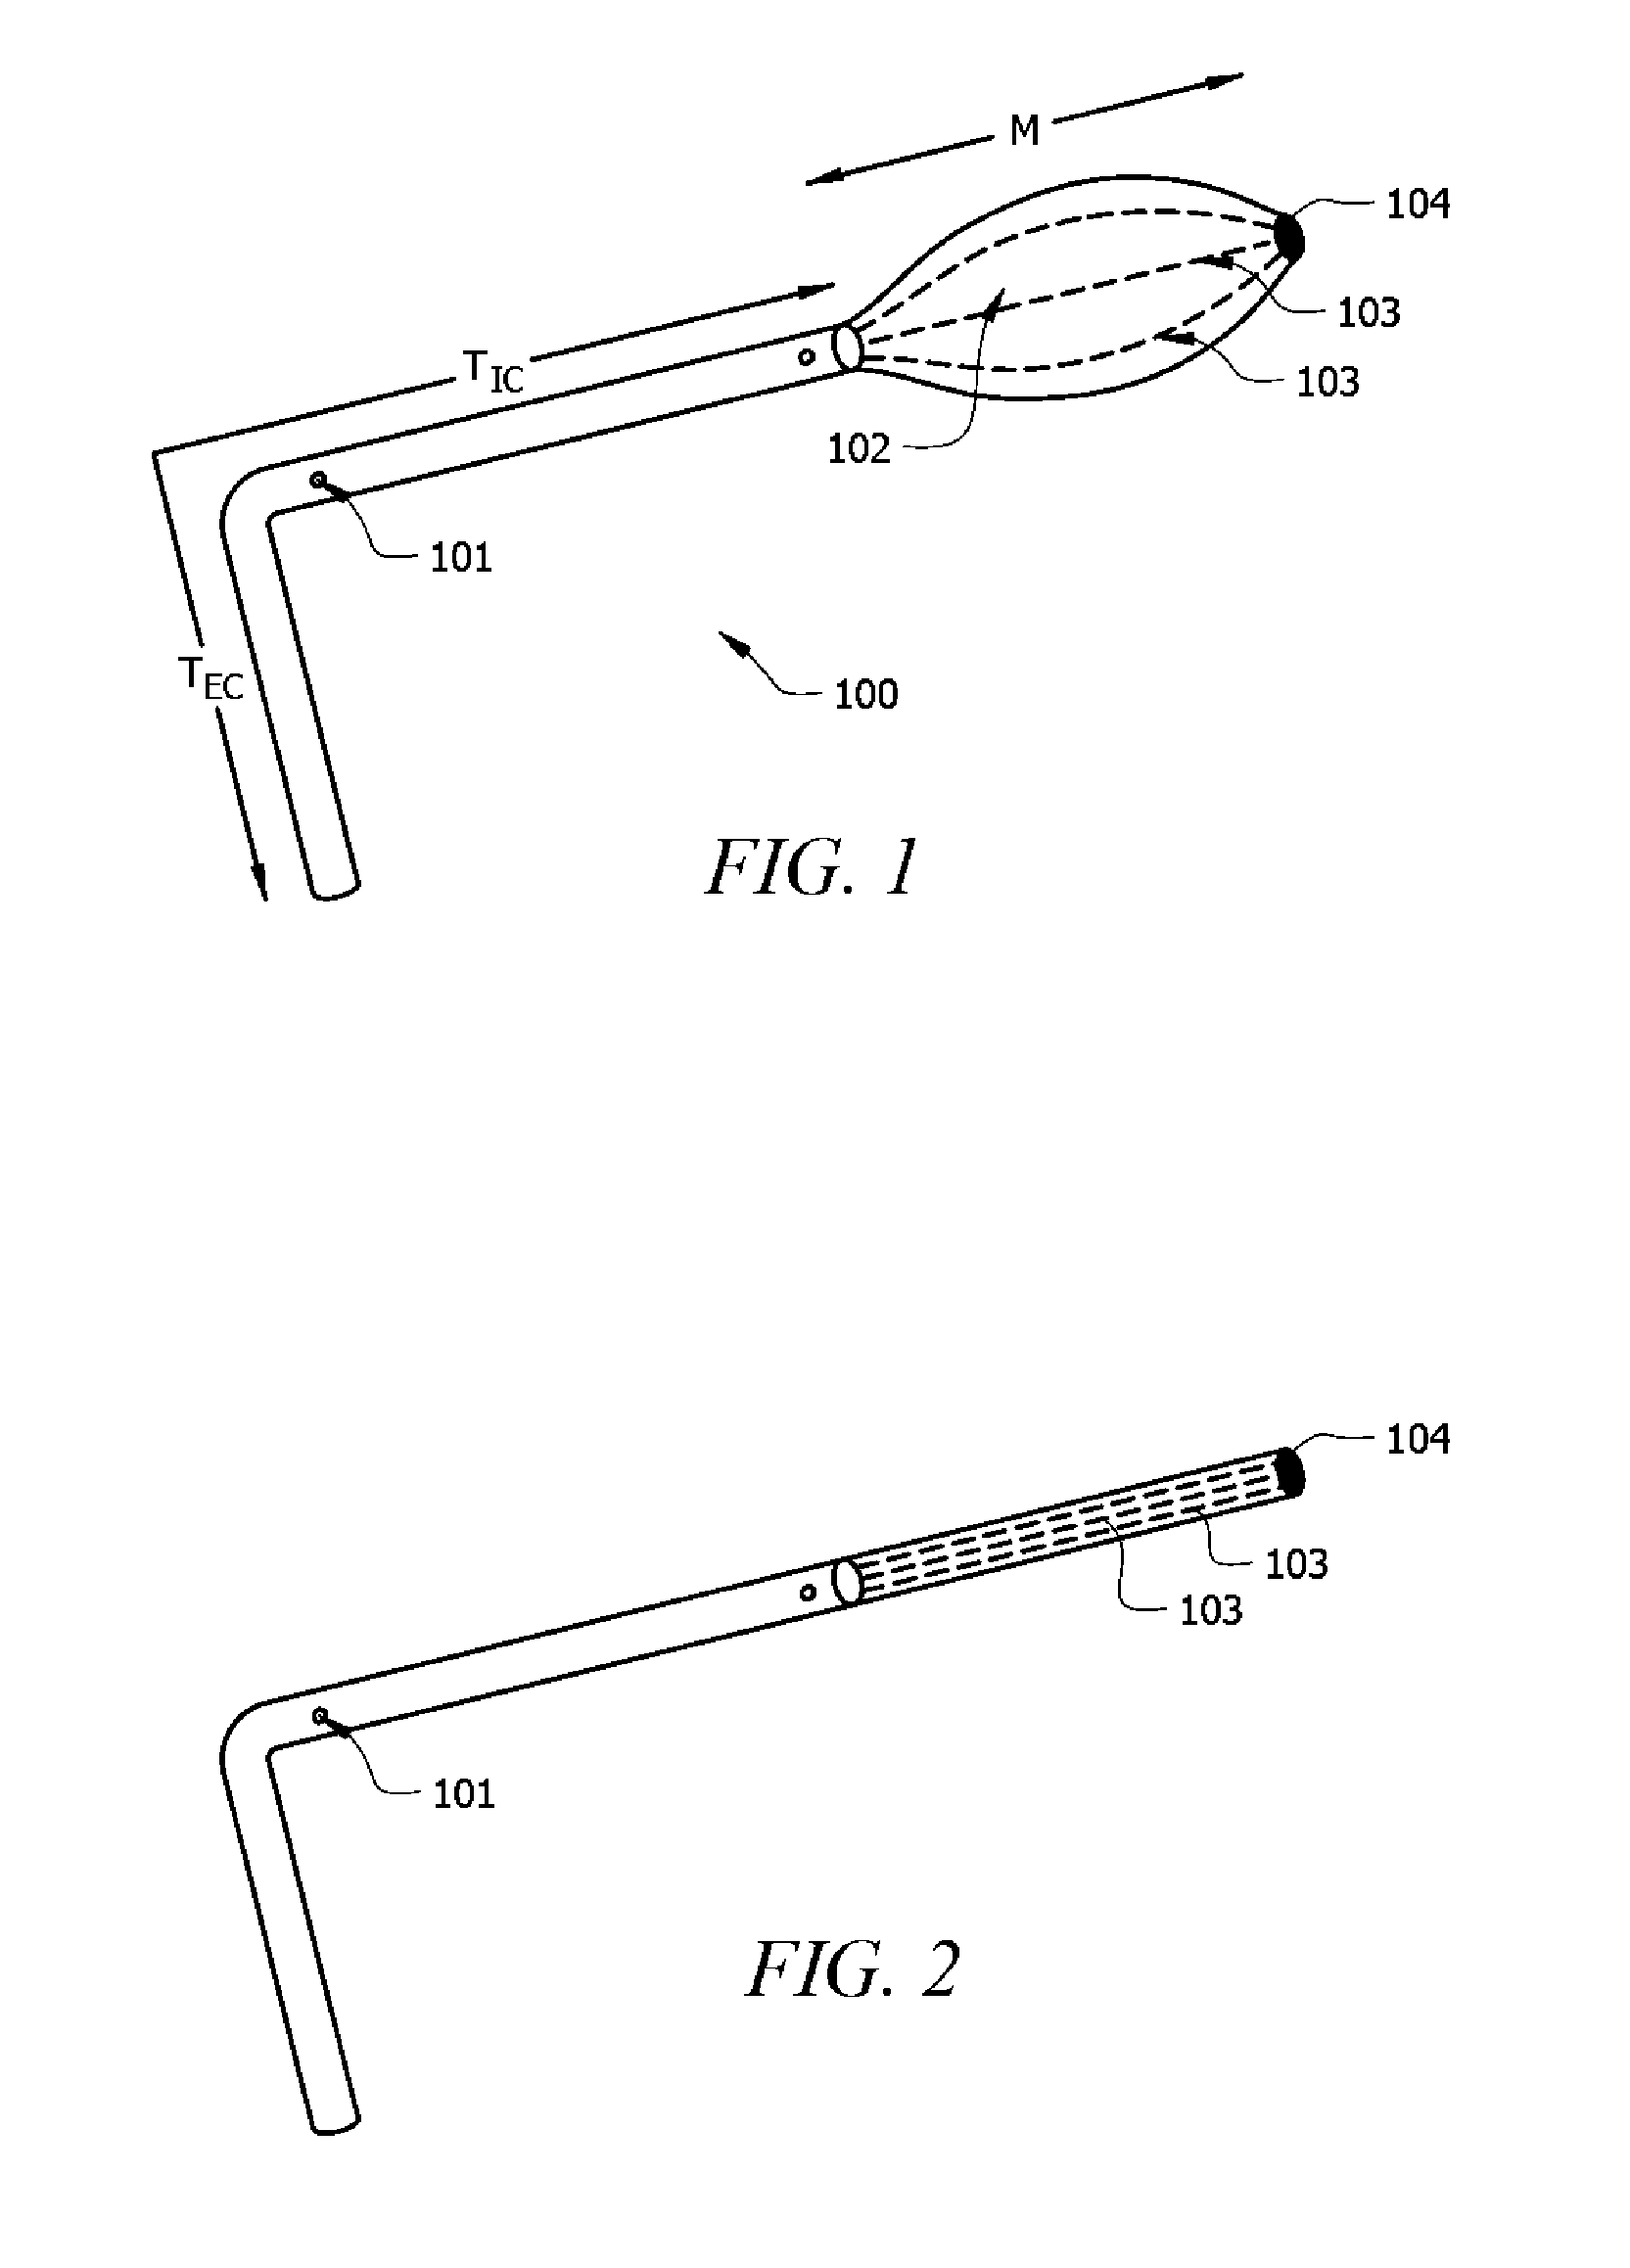 Anti-clogging ventricular catheter for cerebrospinal fluid drainage